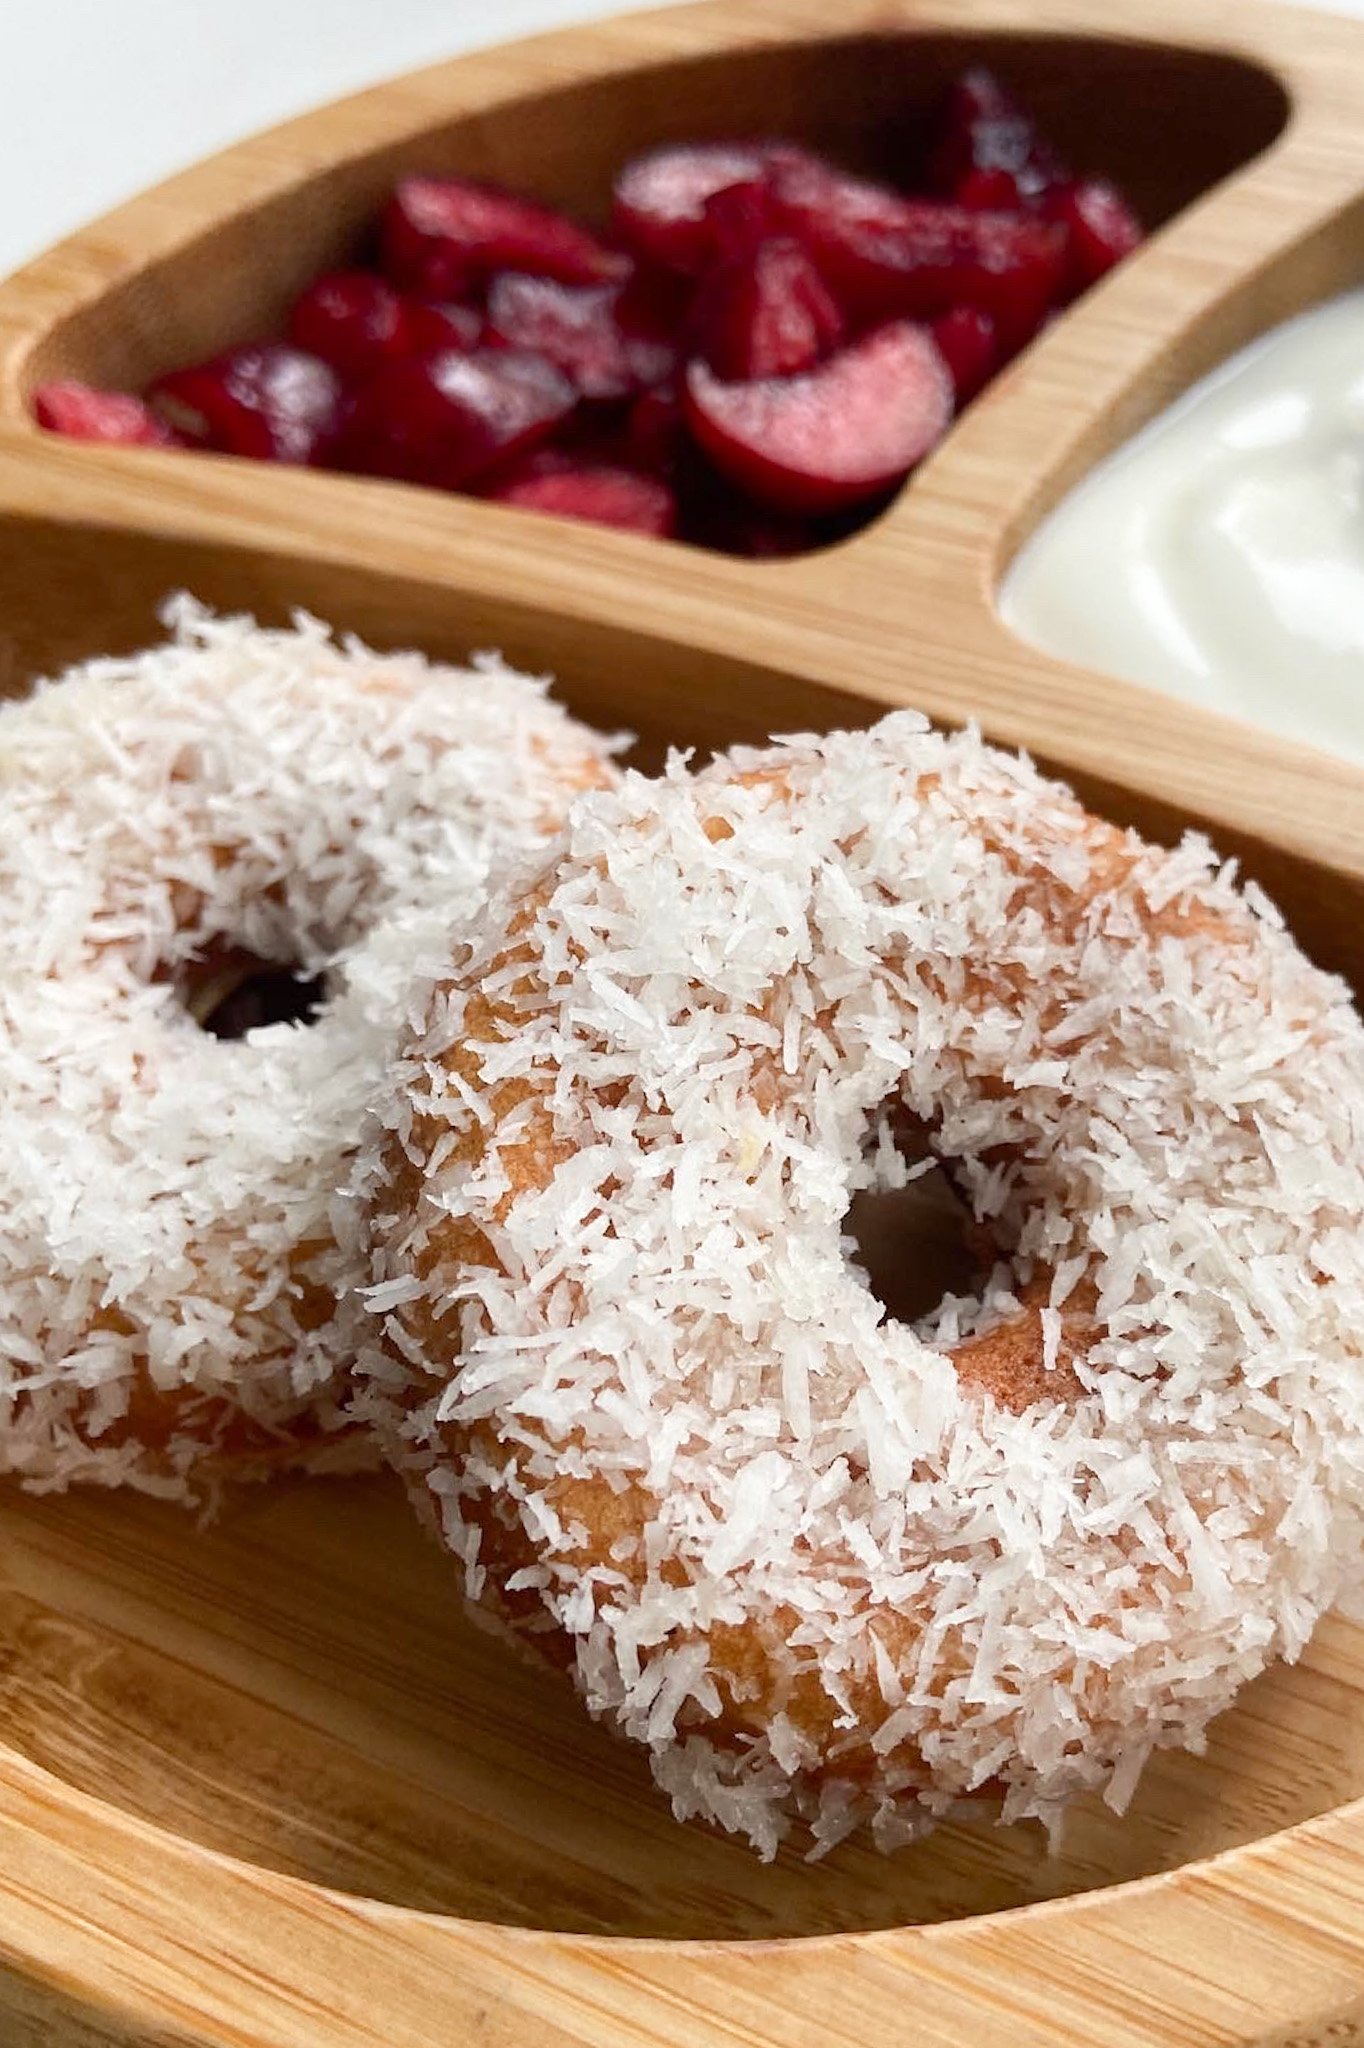 Homemade donuts, the soft recipe - lilie bakery